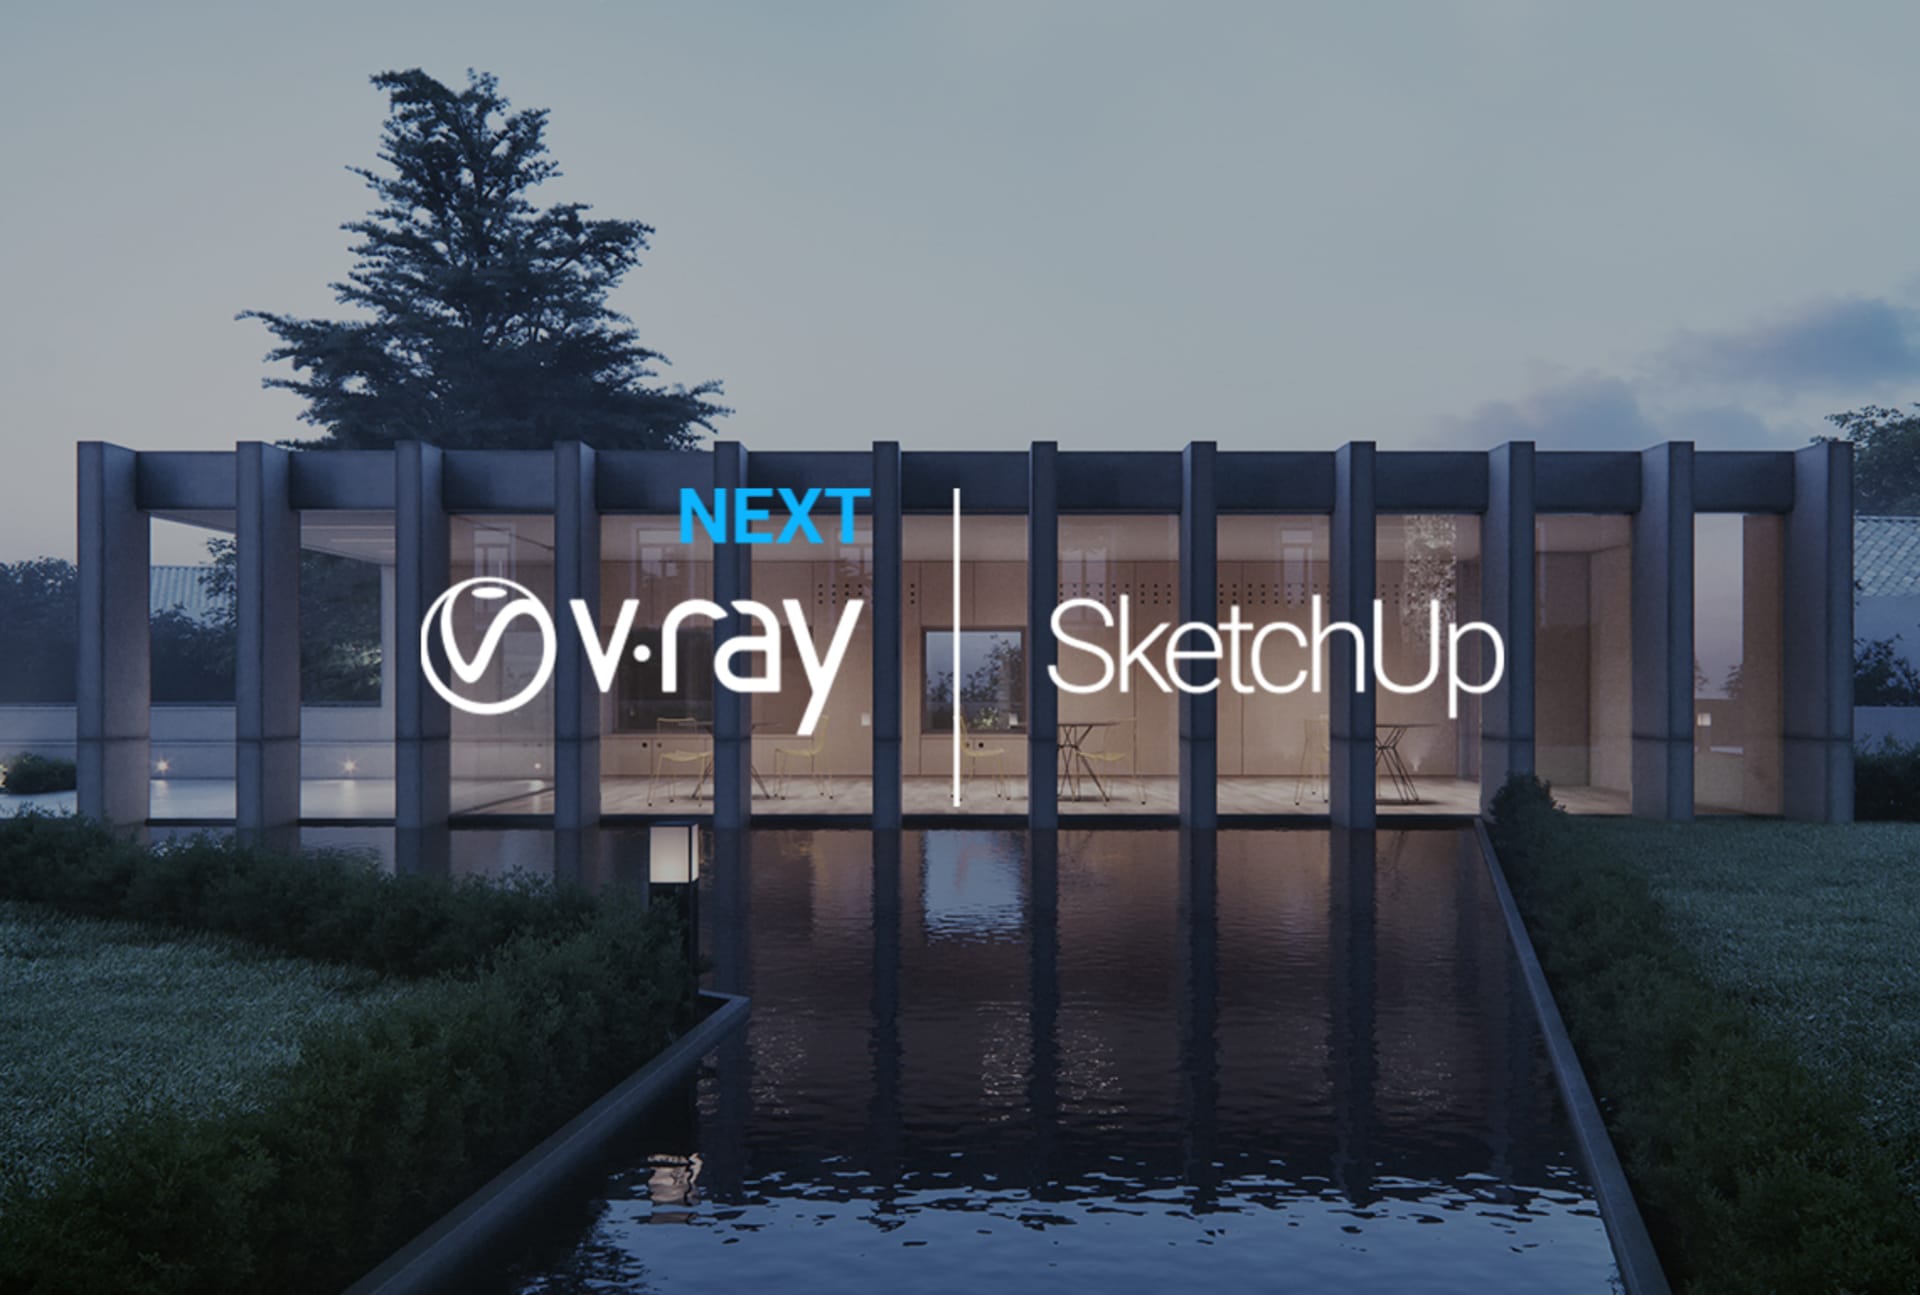 vray for 3ds max 2019 free download